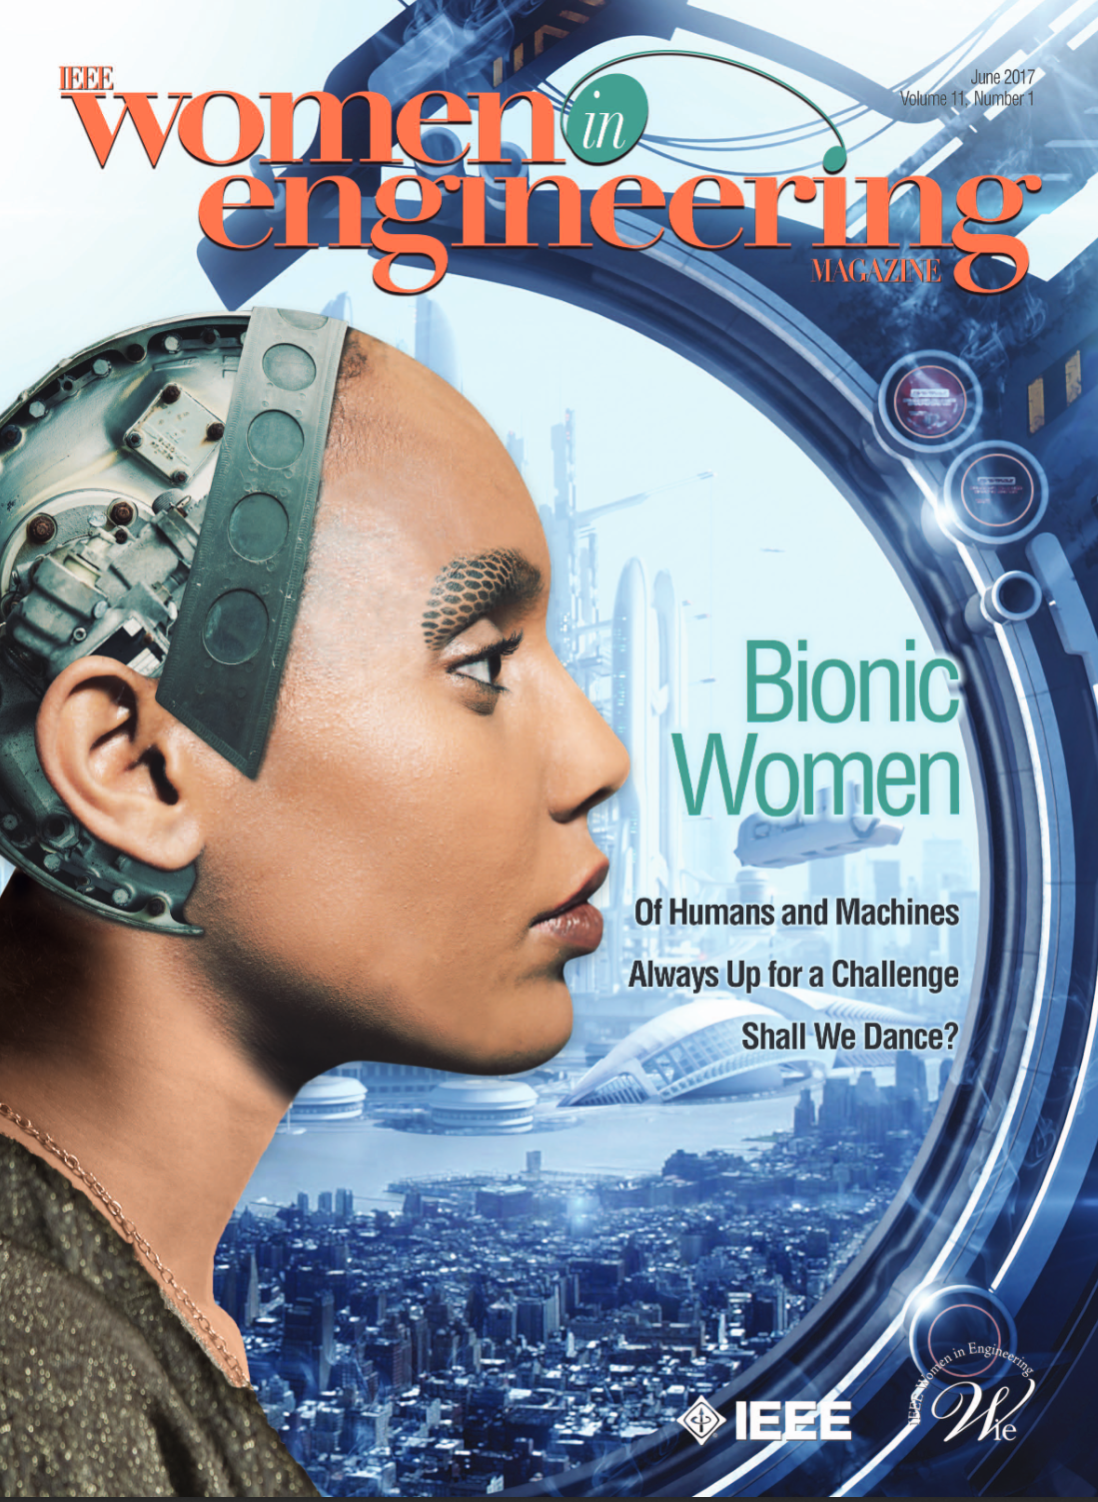 Dr. Deelman and Pegasus contributions highlighted in the IEEE Women in Engineering Magazine